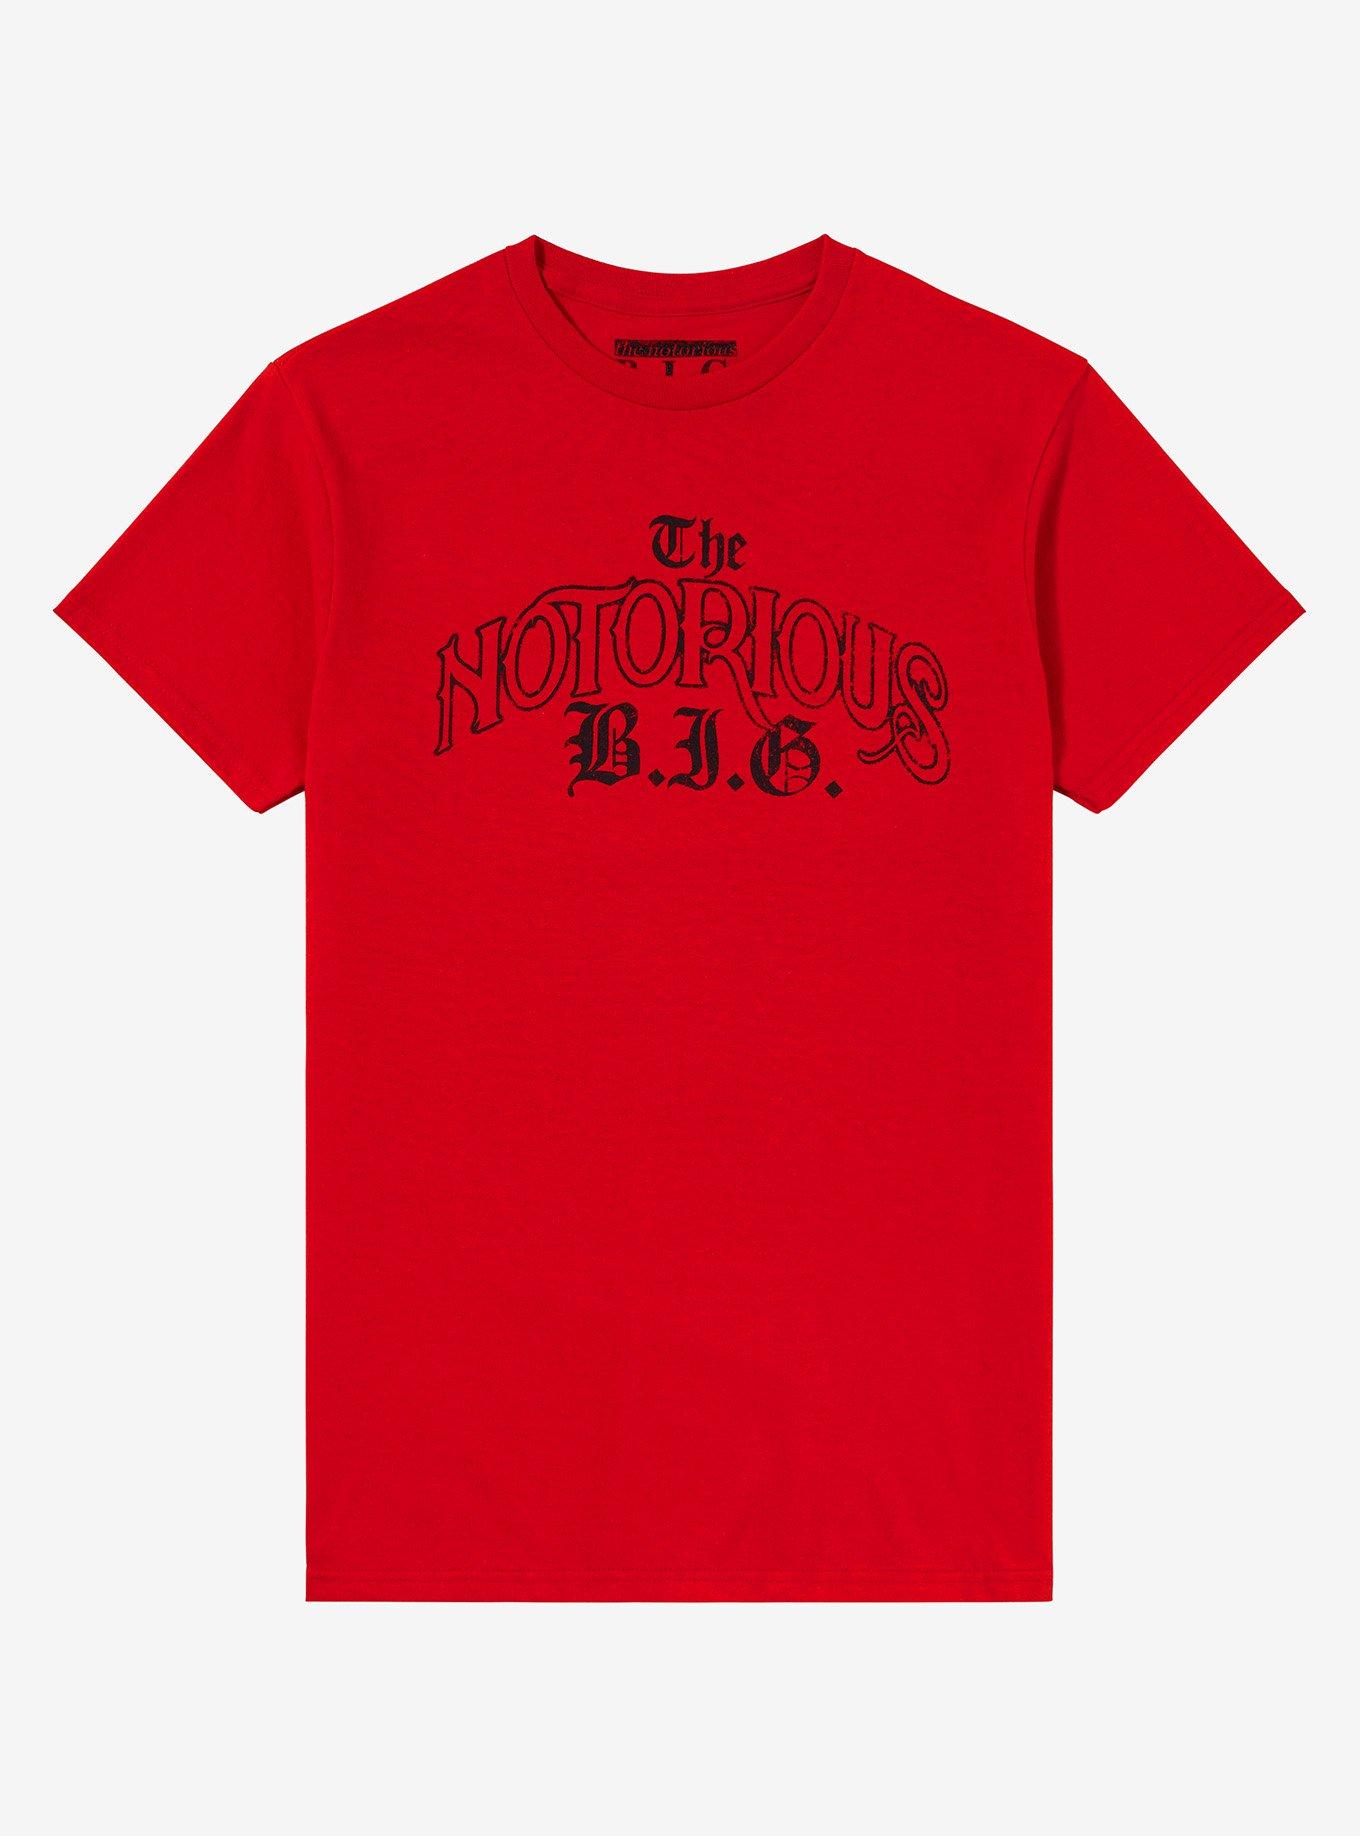 The Notorious B.I.G. Two-Sided Boyfriend Fit Girls T-Shirt, RED, hi-res